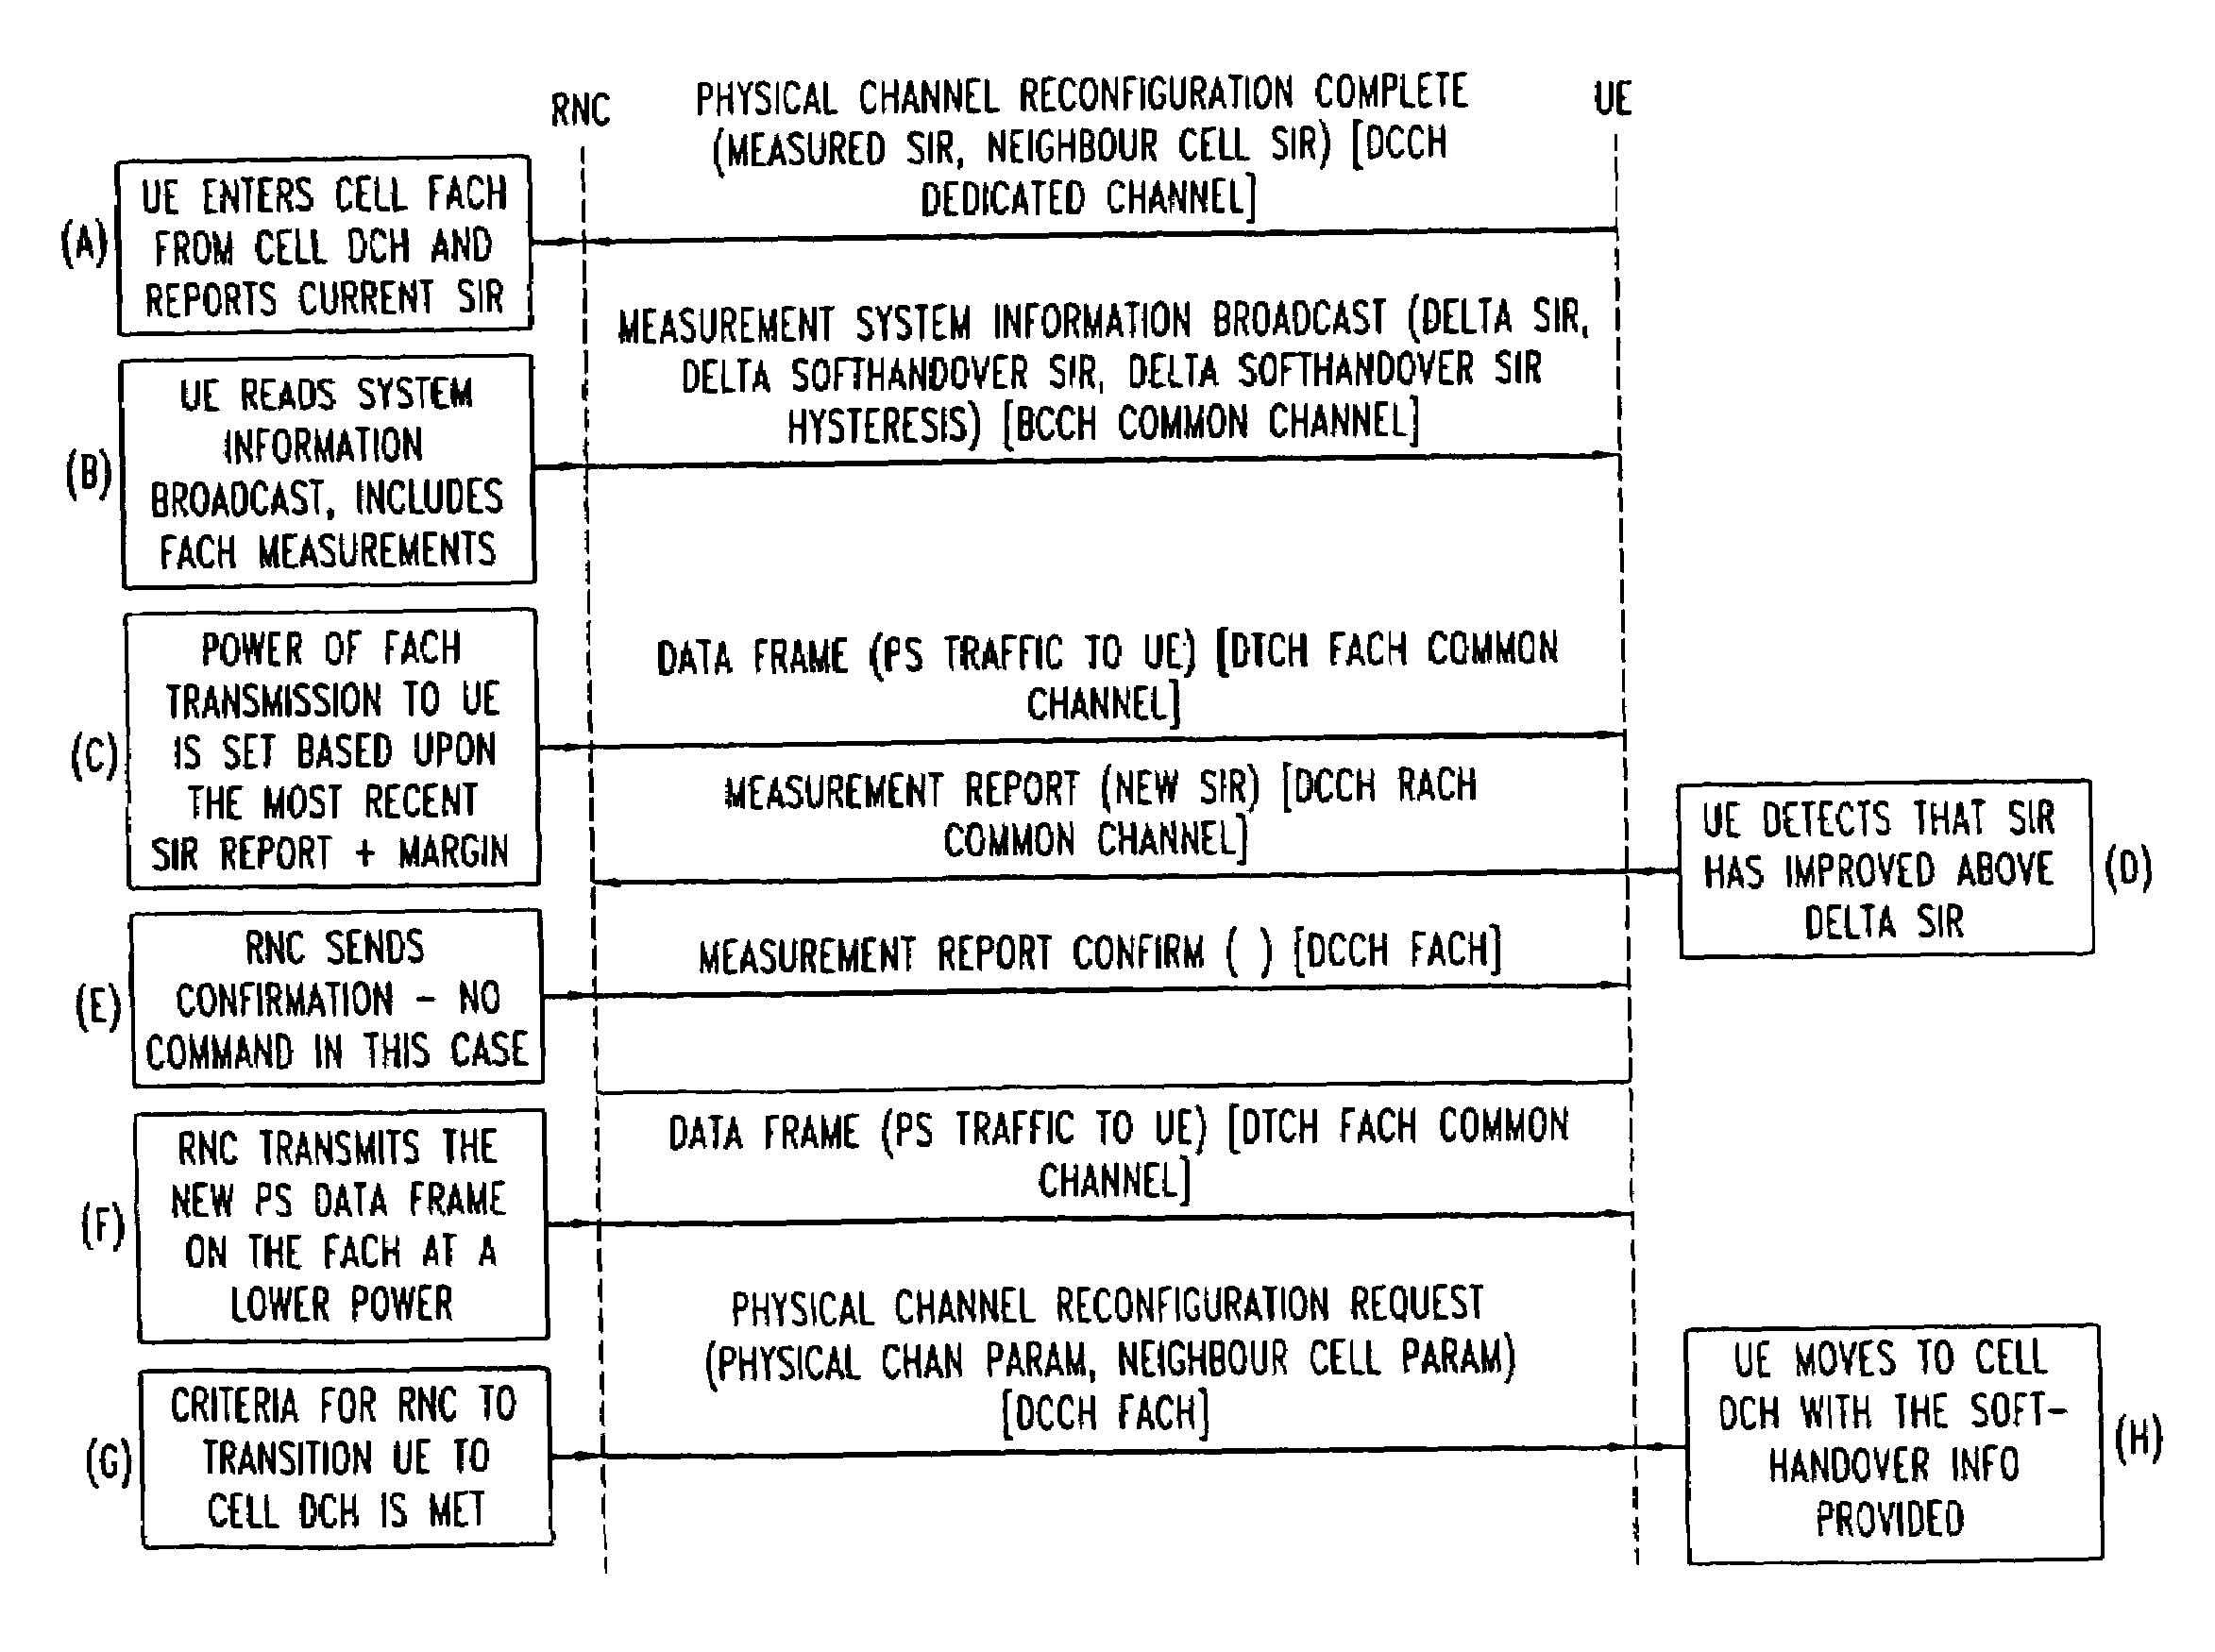 Adjusting the transmission power of a forward access channel (FACH), and a corresponding network for mobile telecommunications